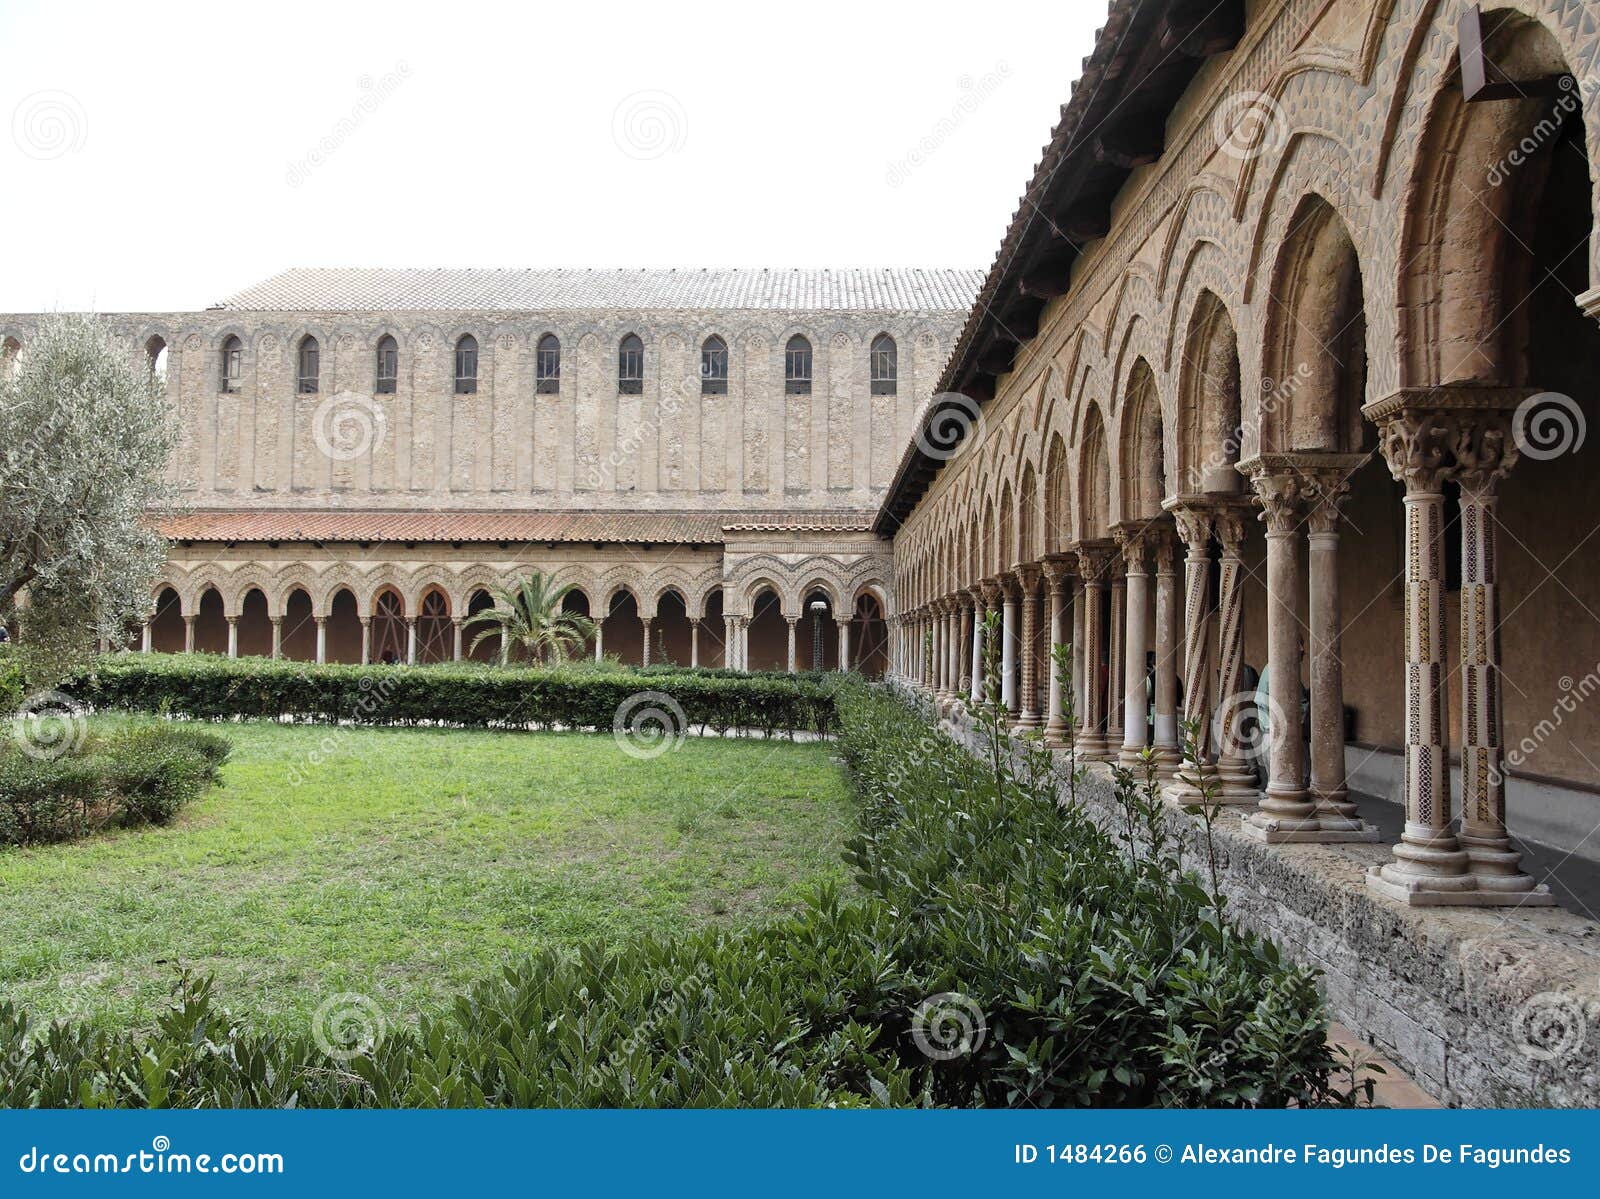 detail of the cloister of monreale cathedral